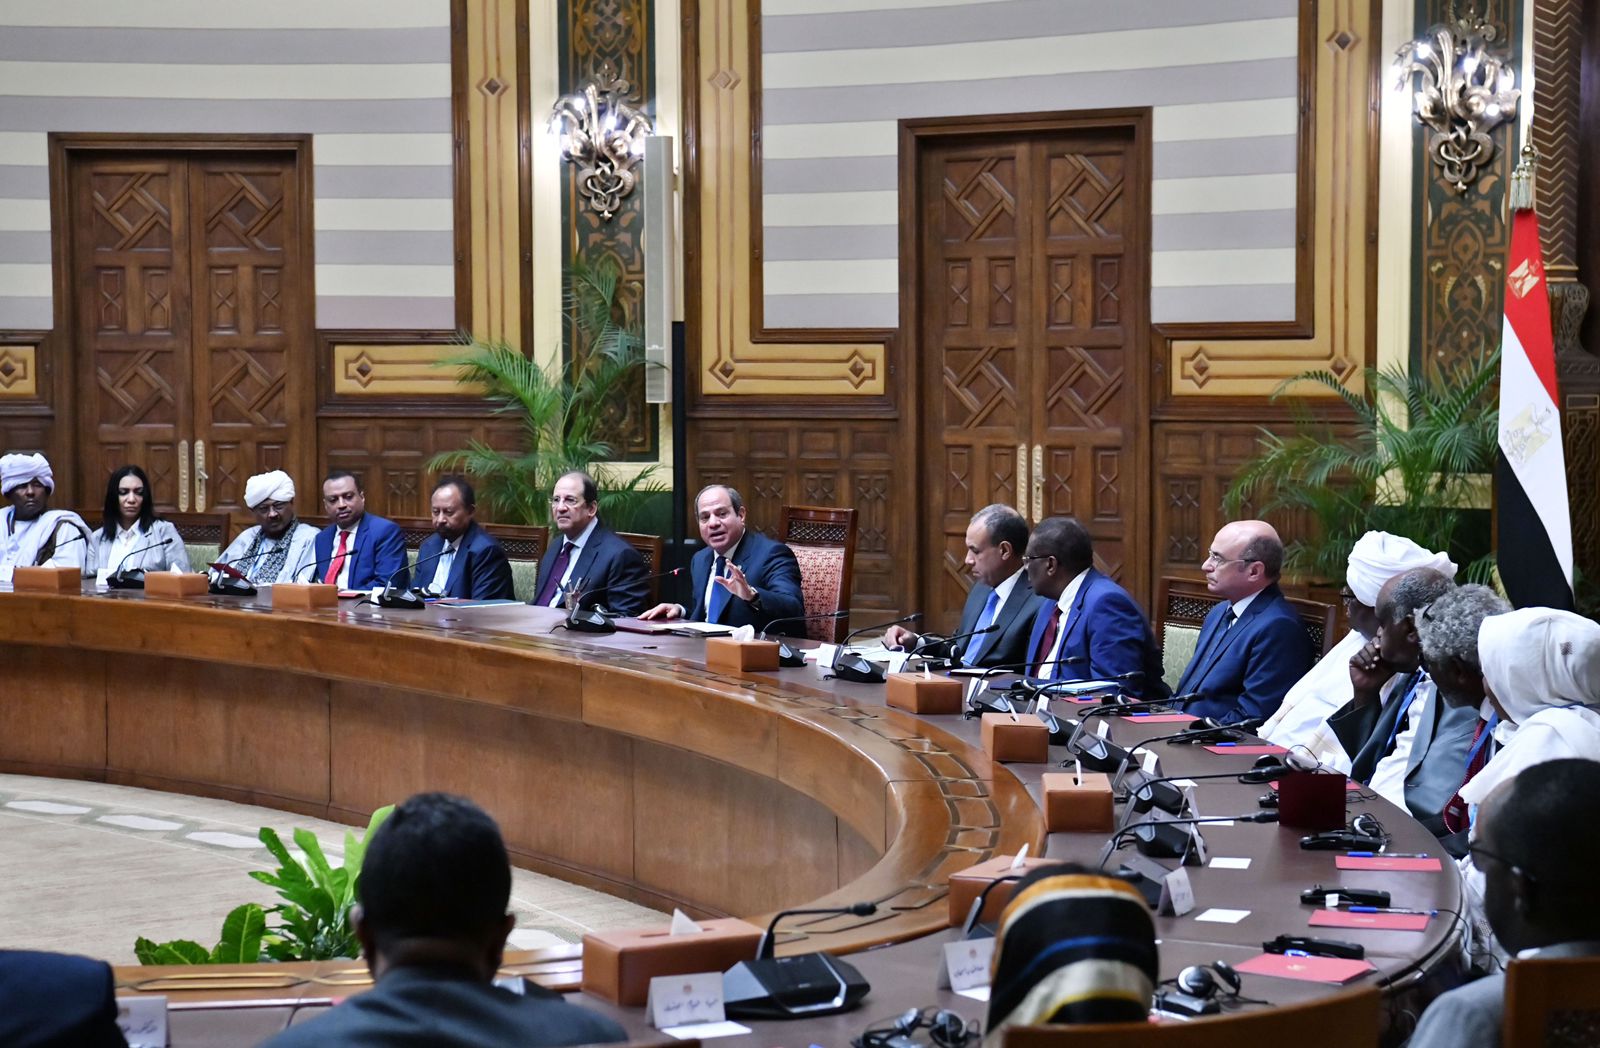 President Sisi: The Egyptian state is making every effort to confront the repercussions of the Sudanese crisis